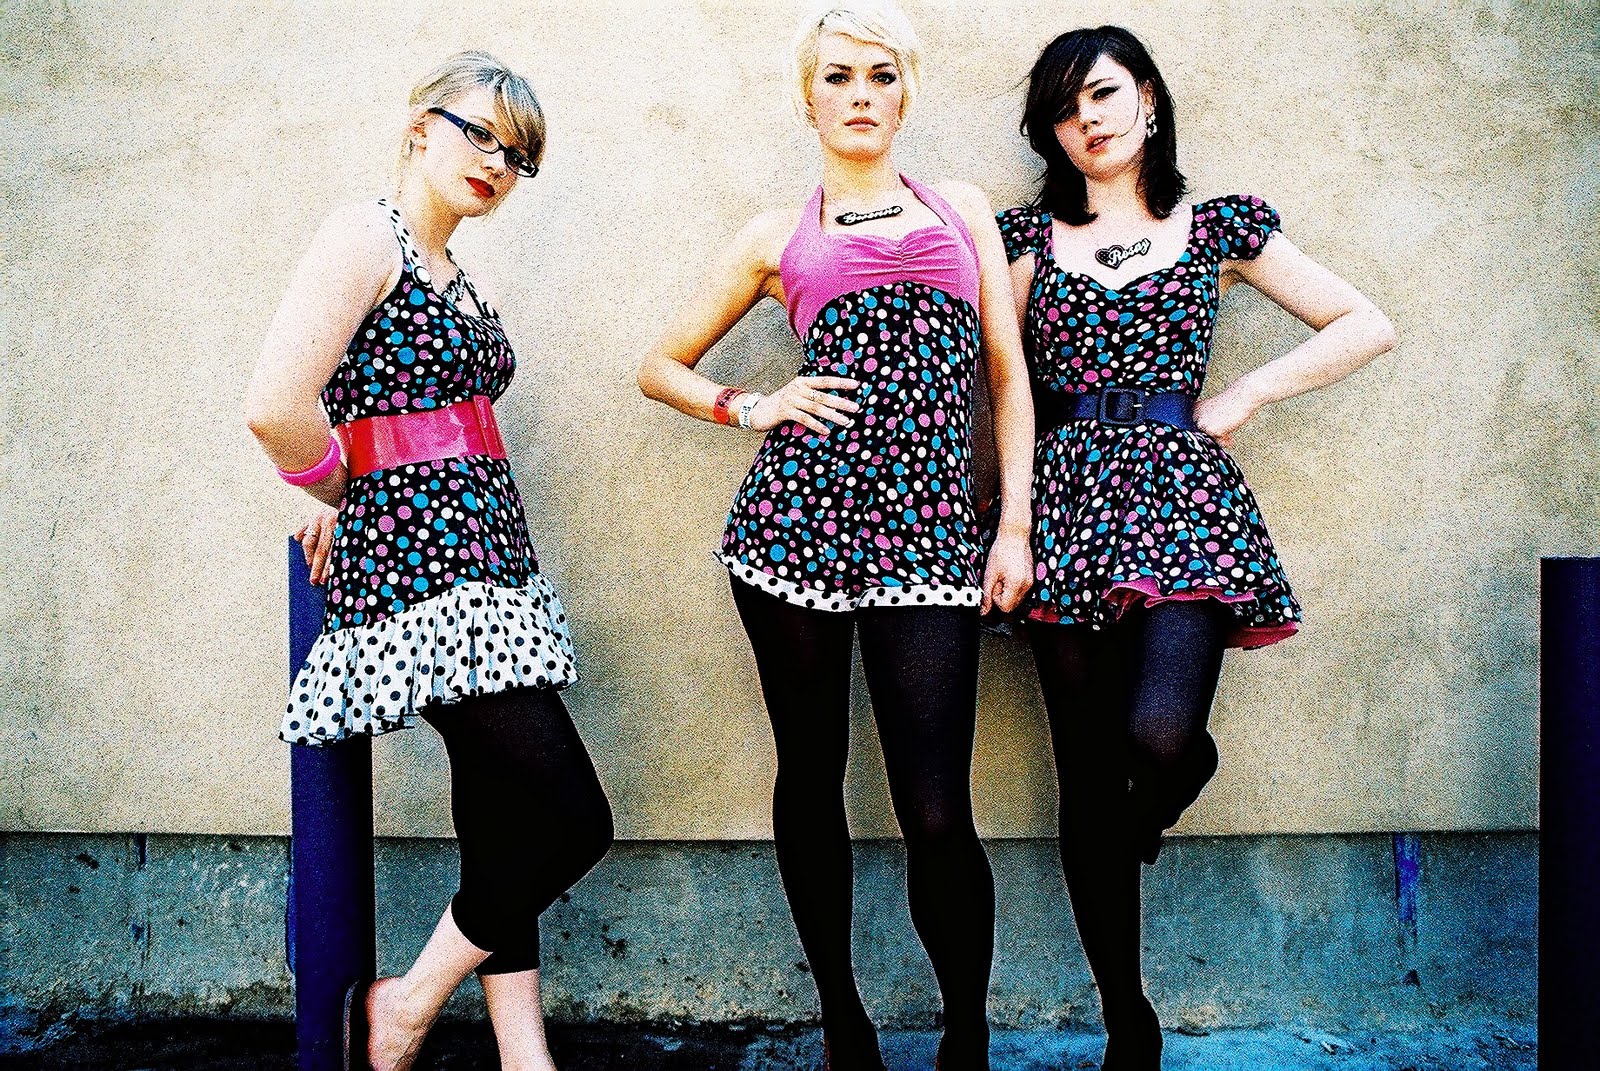 the pipettes tour